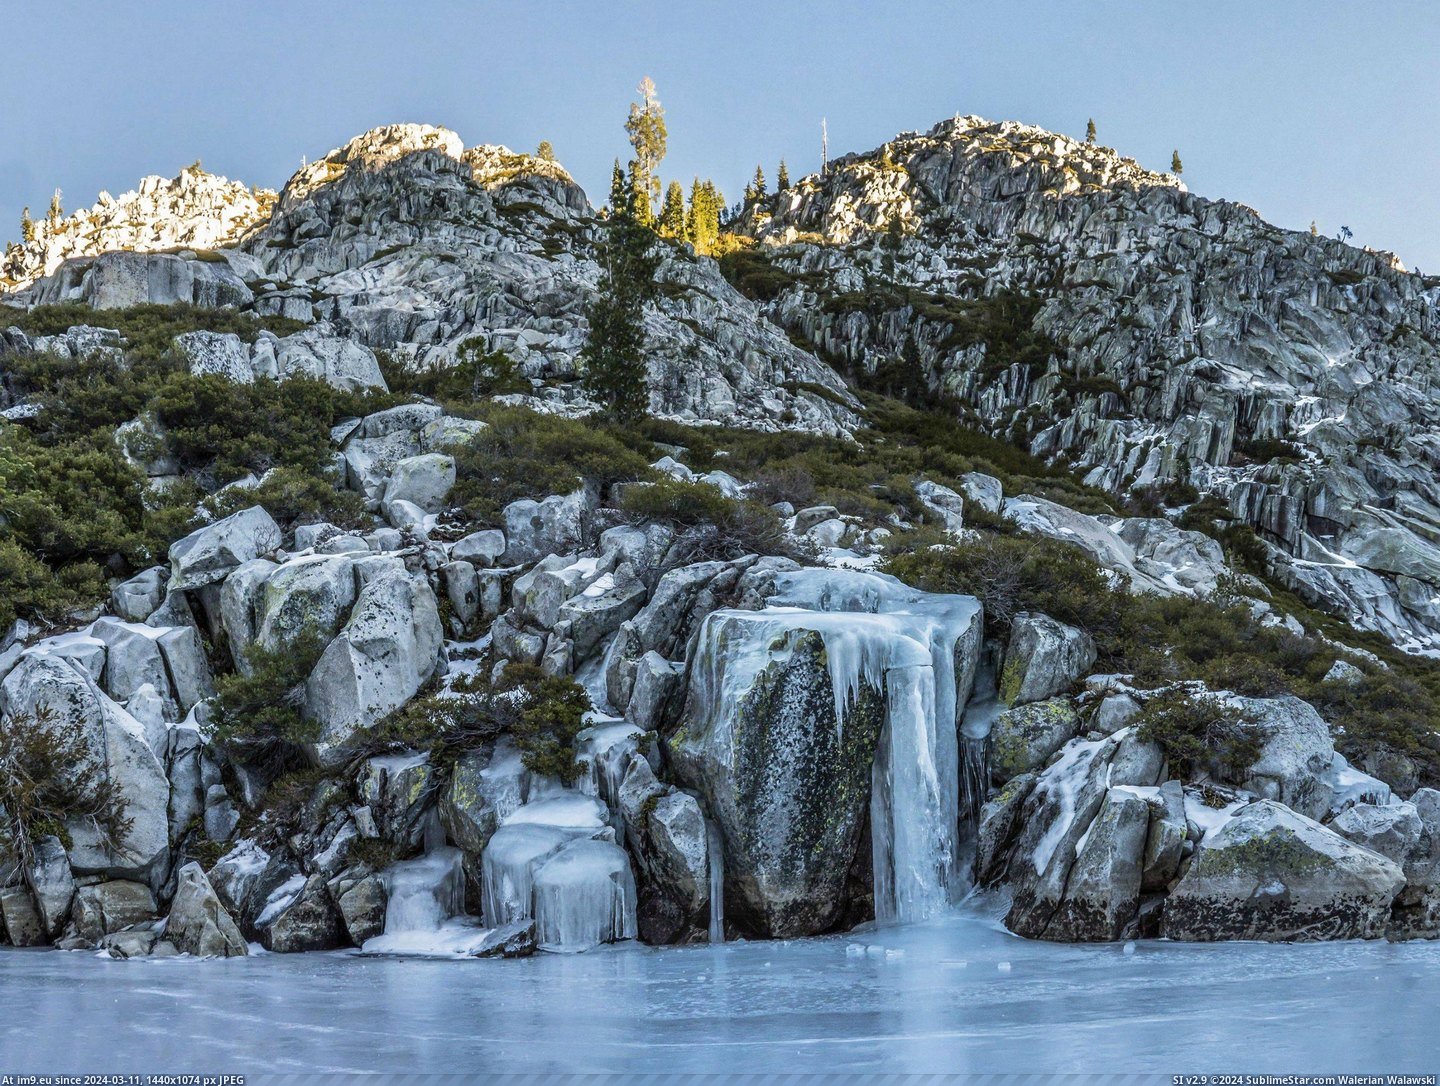 #Big #Lake #Bear #Trinity #Shore #Wilderness #2700x2025 #Frozen #Waterfall #Alps [Earthporn] 'Frozen Waterfall' at the shore of Big Bear Lake in the Trinity Alps Wilderness [OC][2700x2025] Pic. (Image of album My r/EARTHPORN favs))